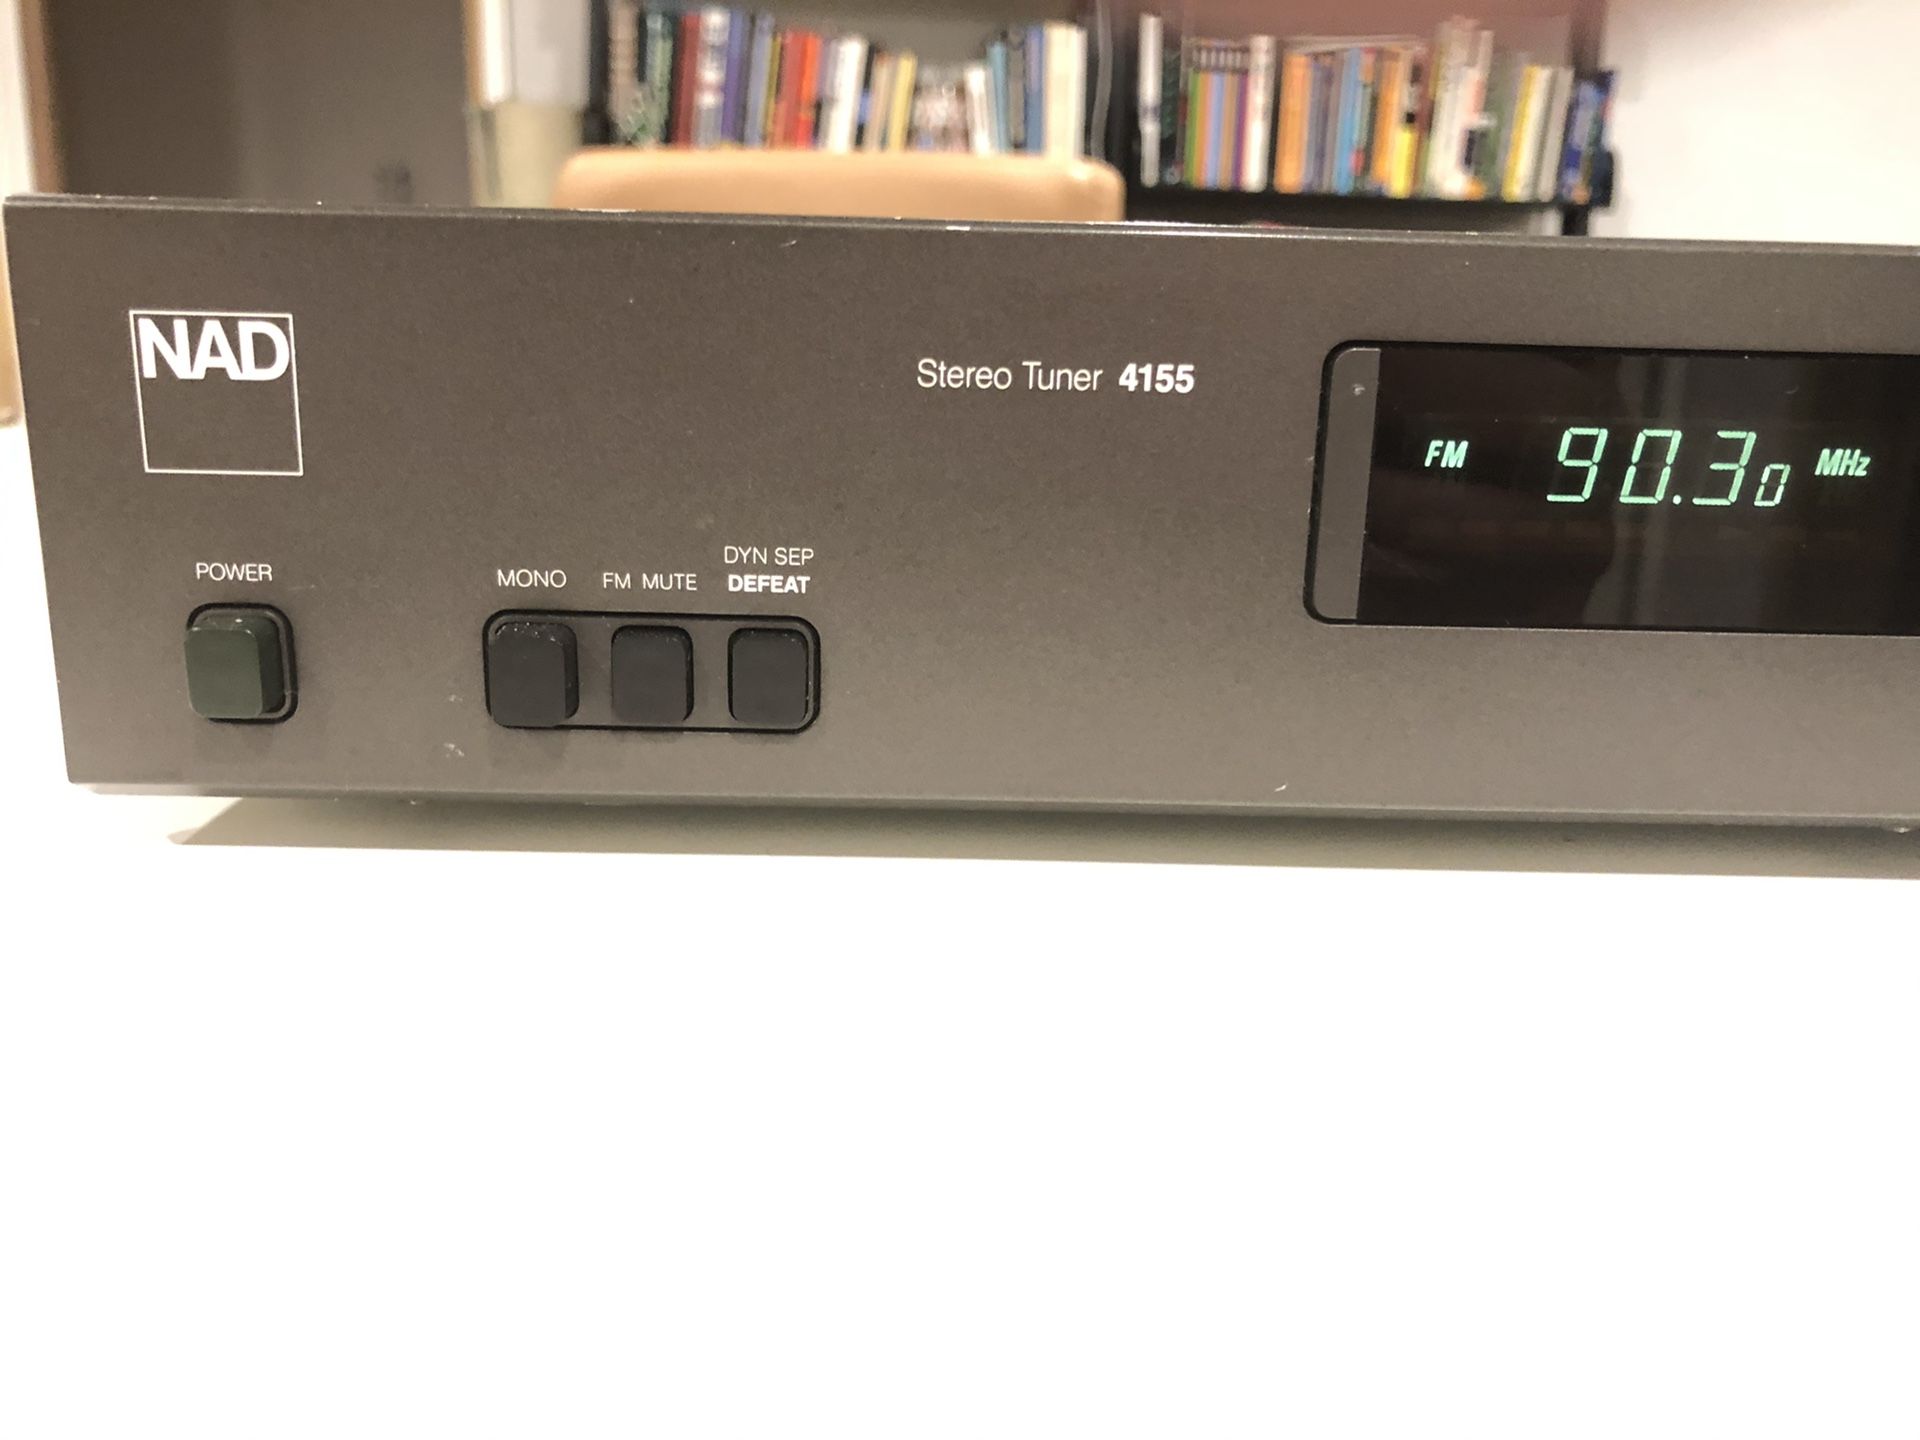 NAD Stereo Tuner 4155